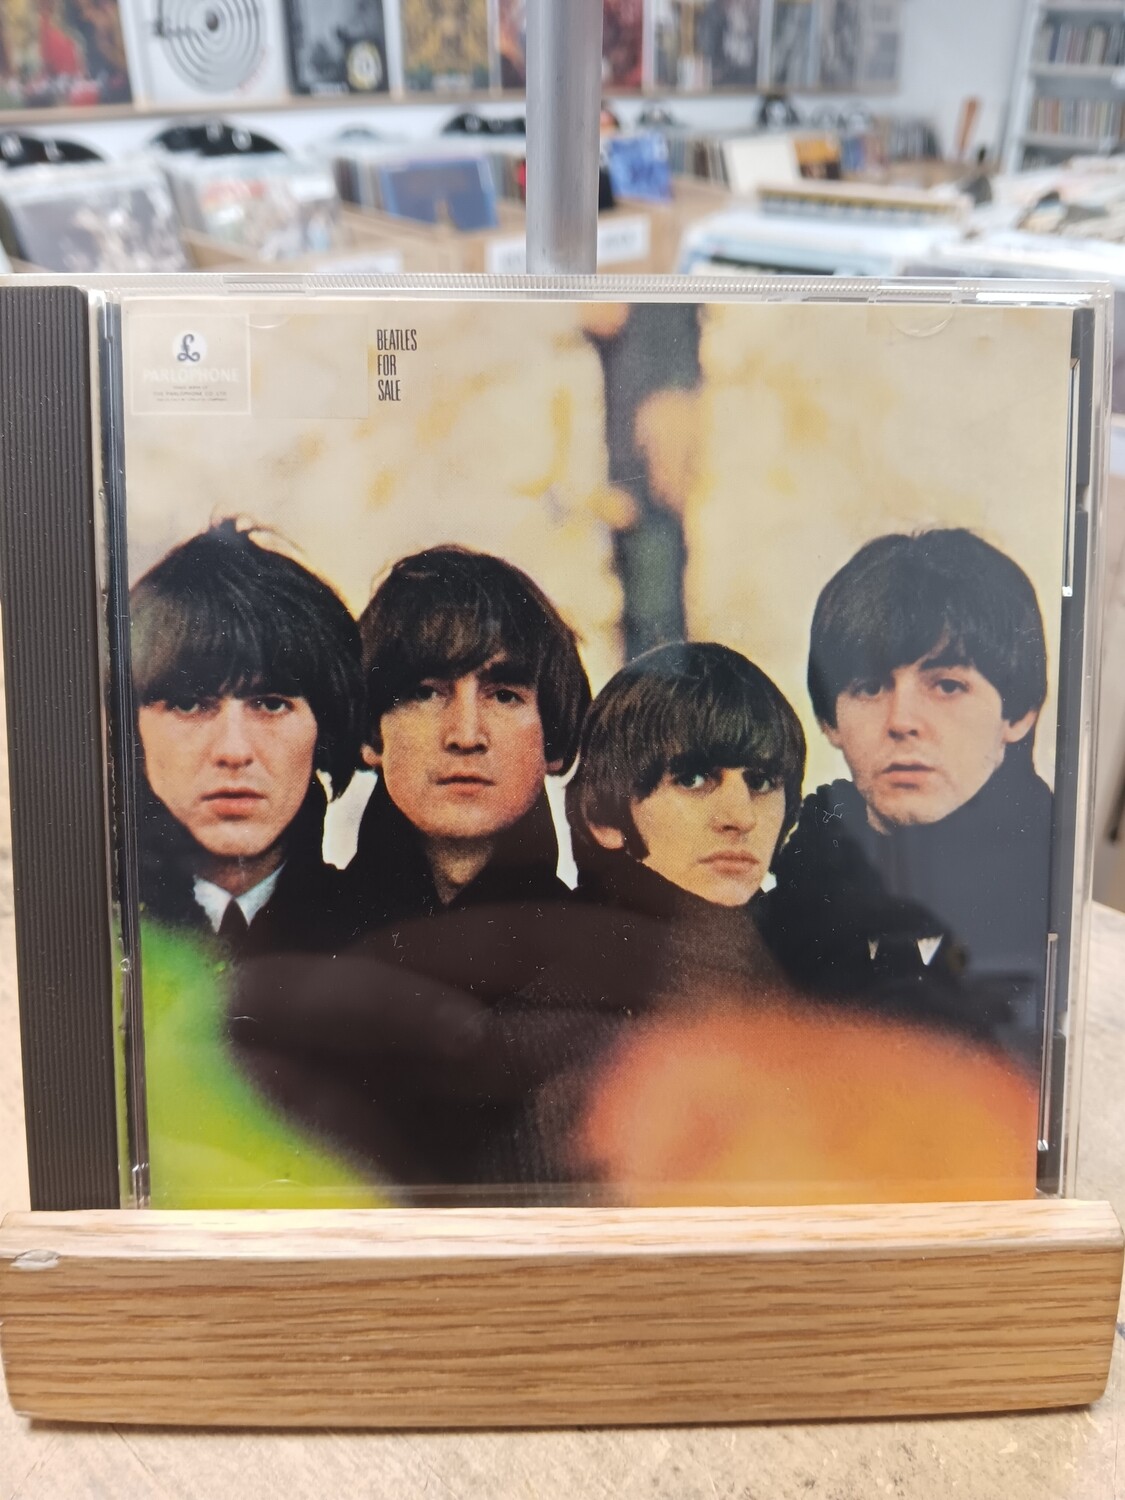 THE BEATLES - Beatles for sale (CD)